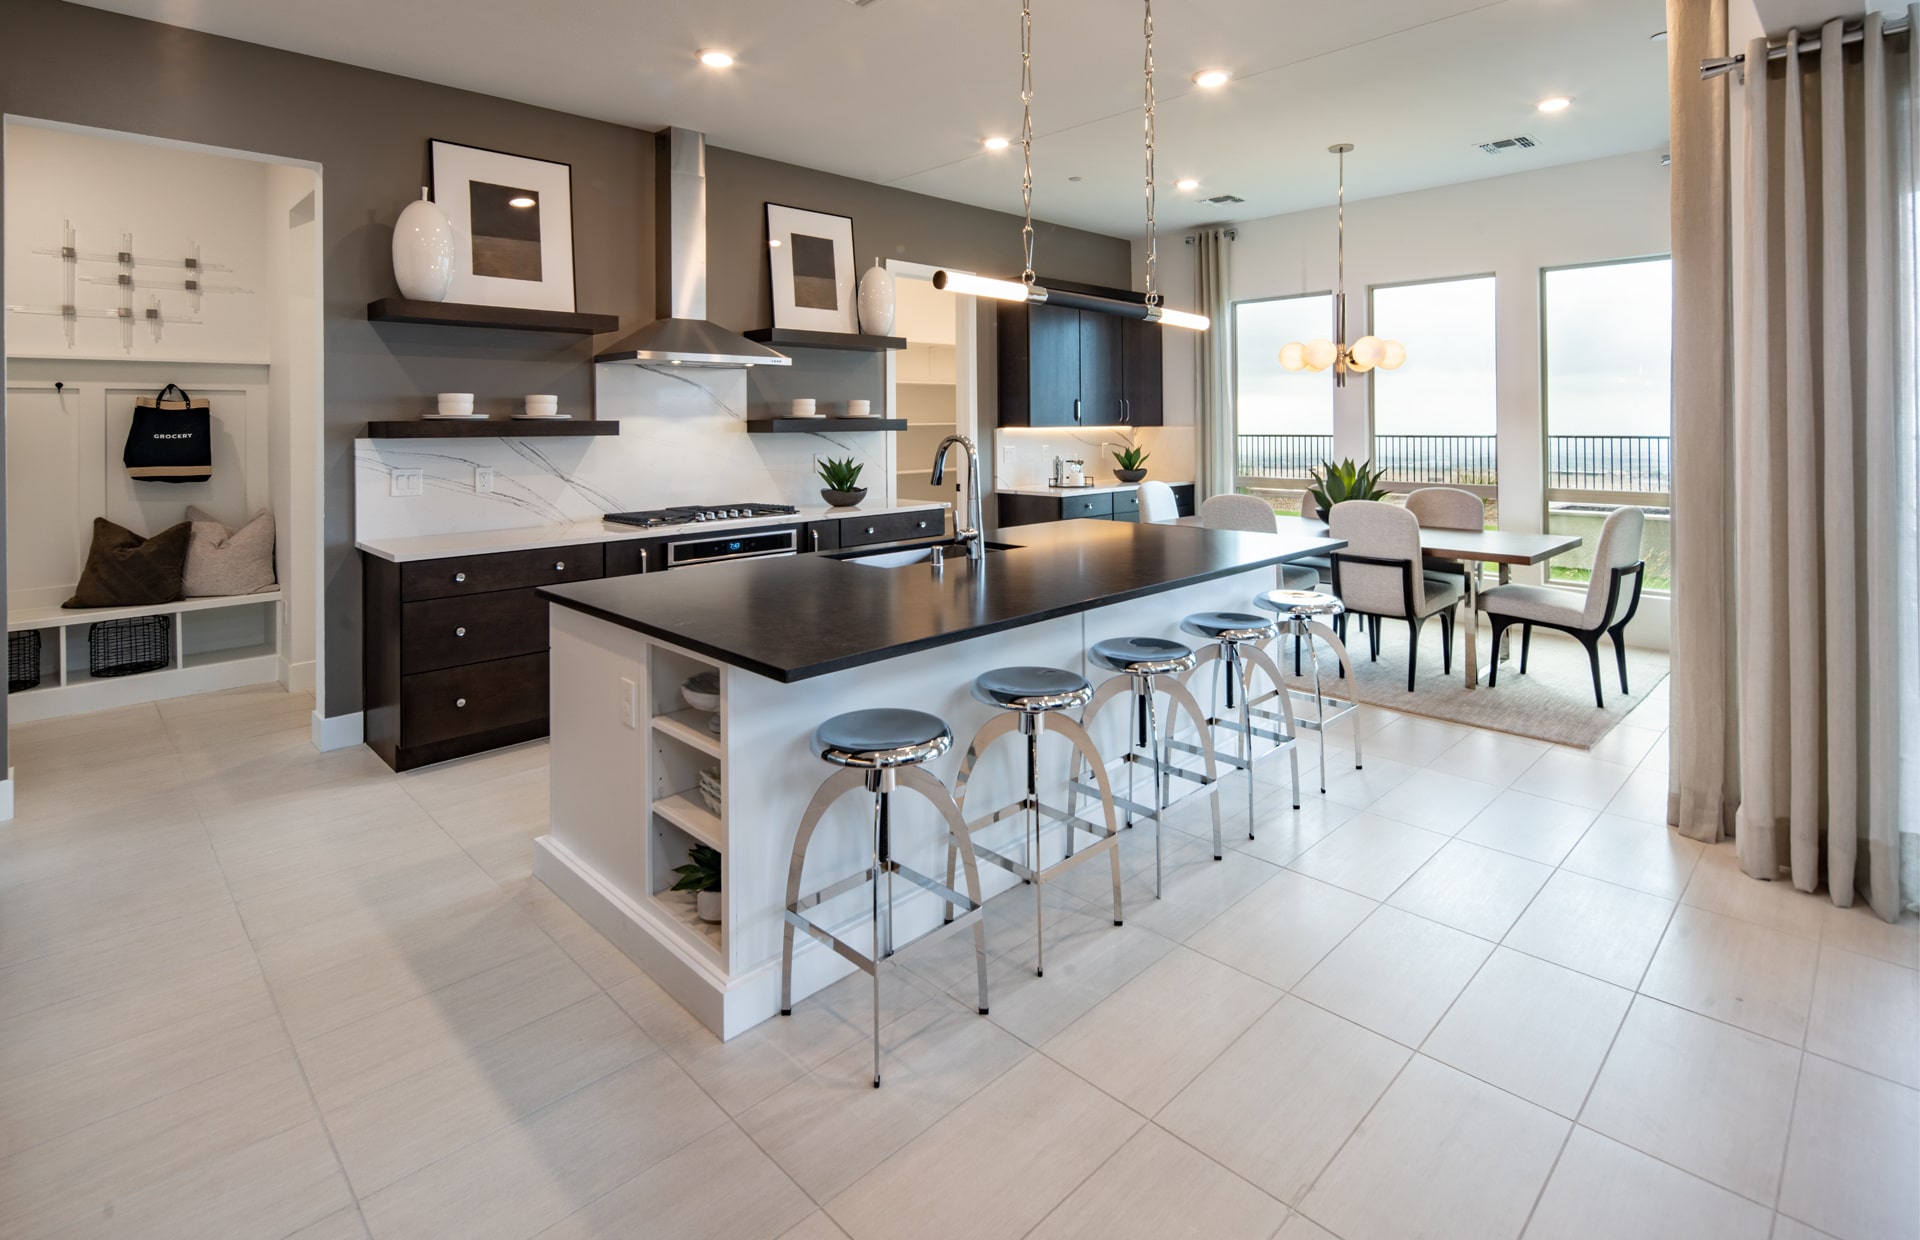 Kitchen of Pesaro Model at Carmel Cliff by Pulte Homes